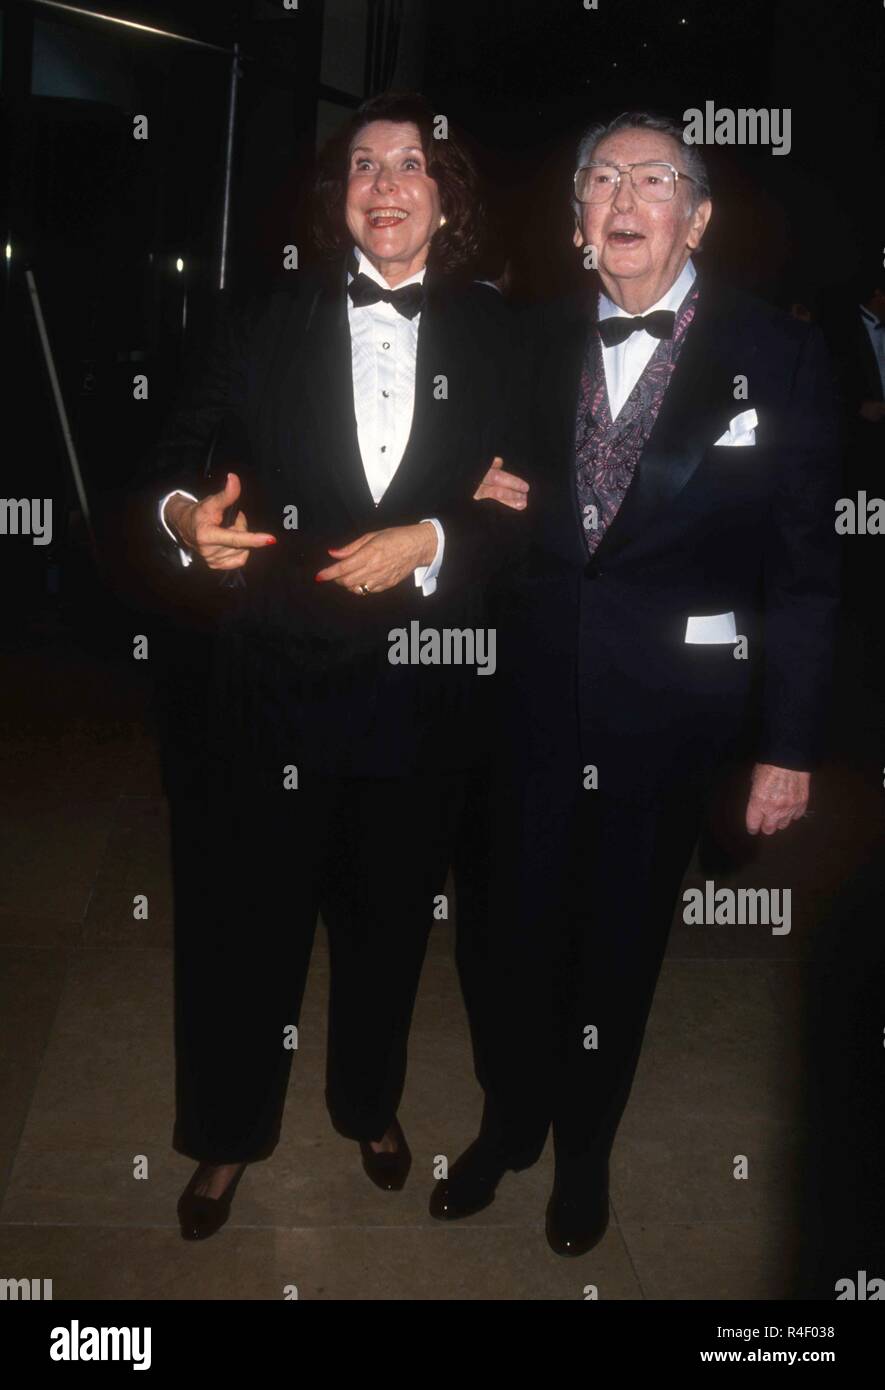 BEVERLY HILLS, CA - FEBRUARY 26: Actor Macdonald Carey attends the Ninth Annual Soap Opera Digest Awards on February 26, 1993 at the Beverly Hilton Hotel in Beverly Hills, California. Photo by Barry King/Alamy Stock Photo Stock Photo